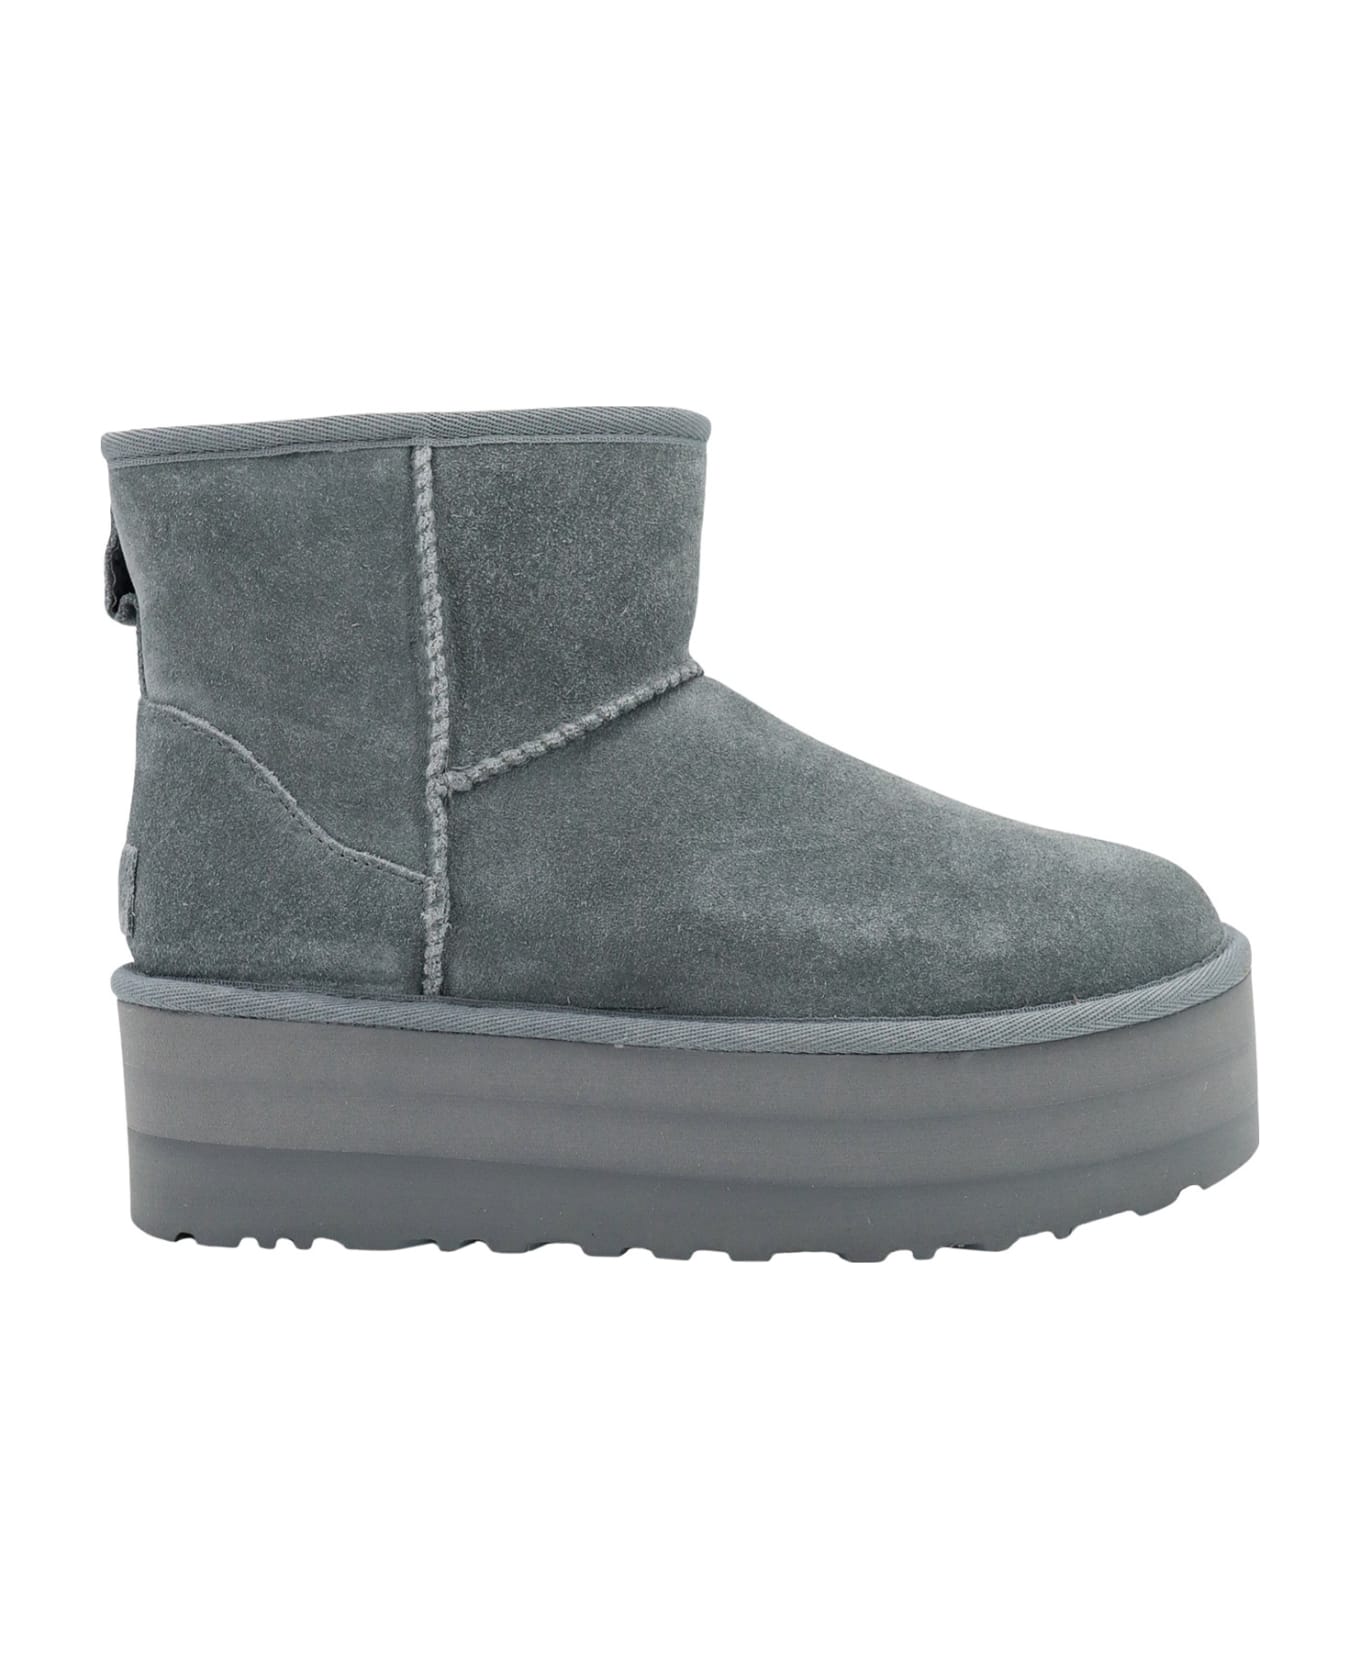 UGG Ankle Boots - Grey ウェッジシューズ